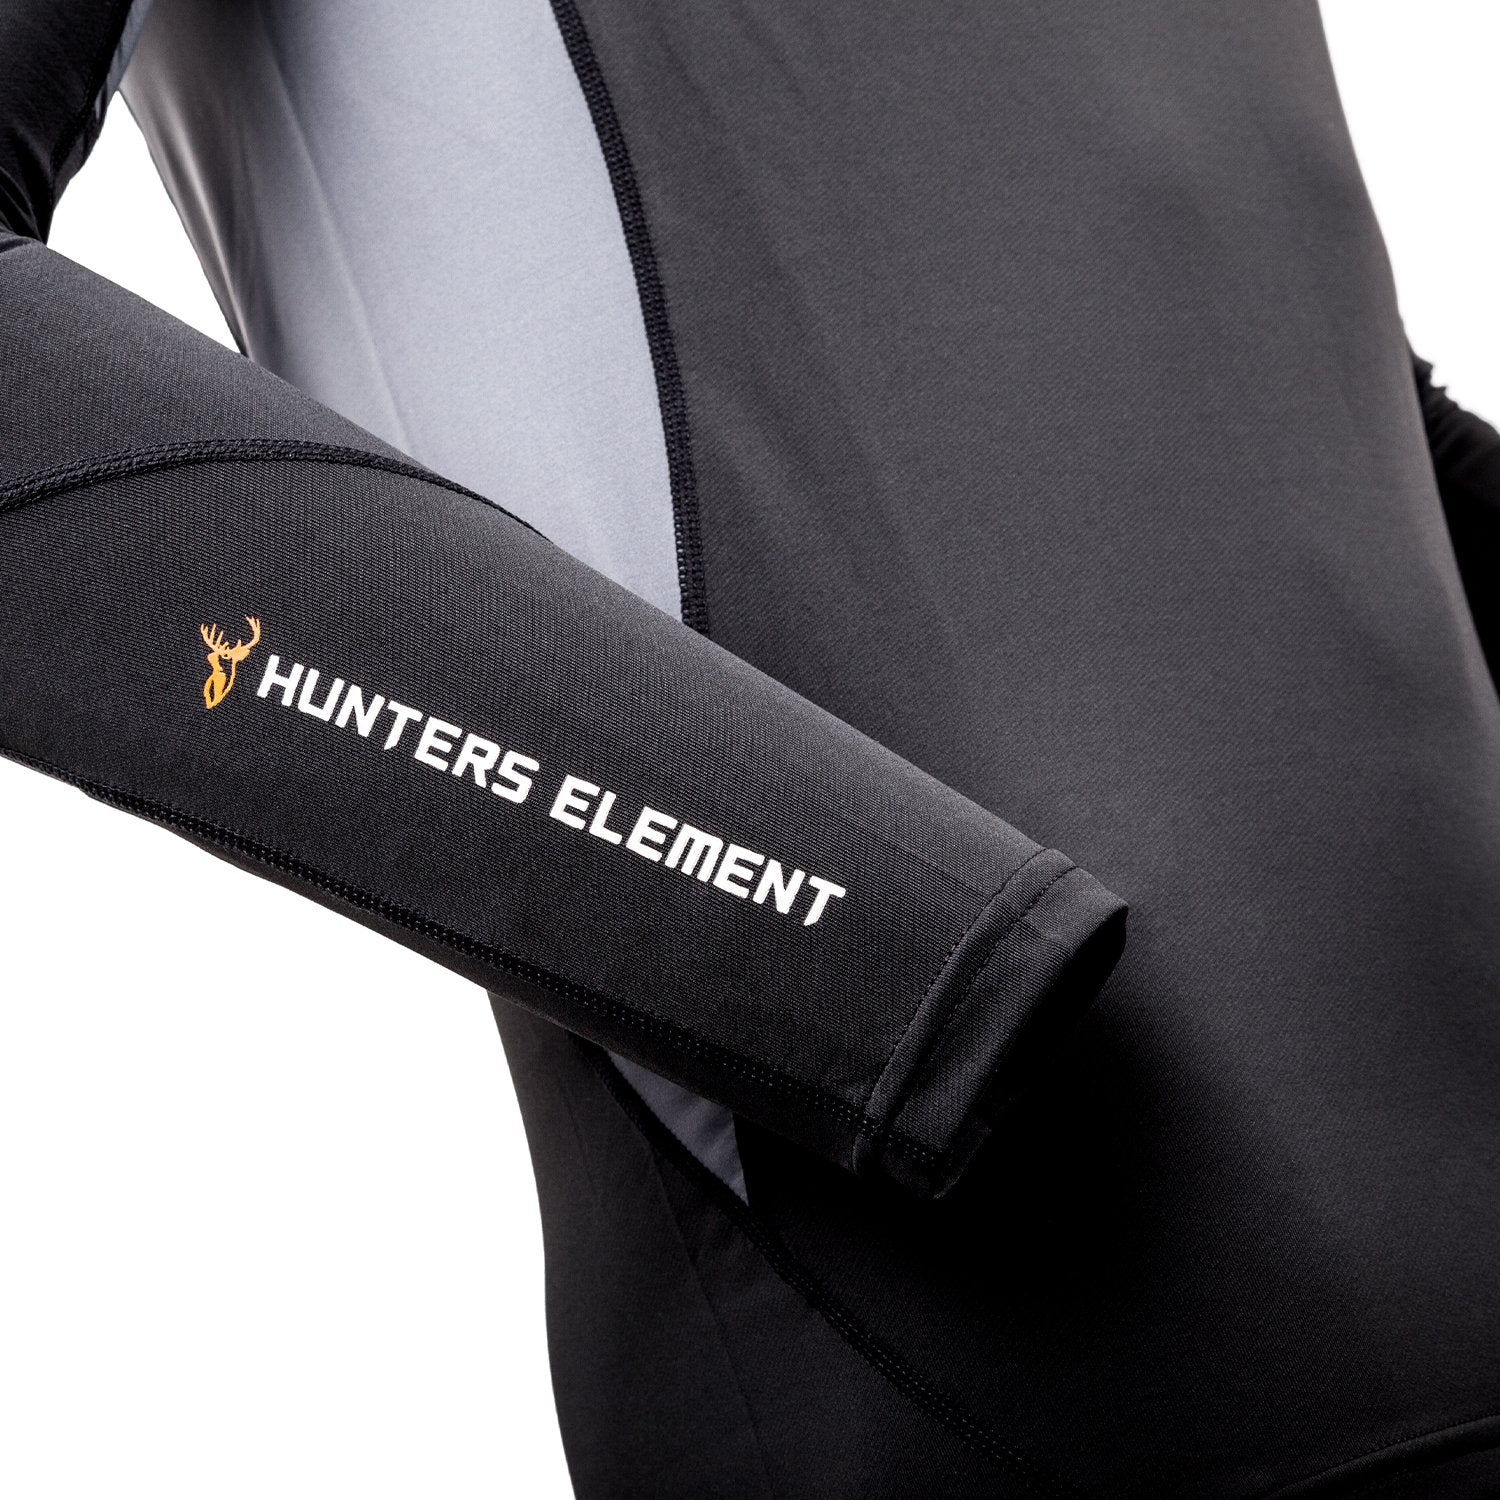 Hunters Element Core Top - Black -  - Mansfield Hunting & Fishing - Products to prepare for Corona Virus